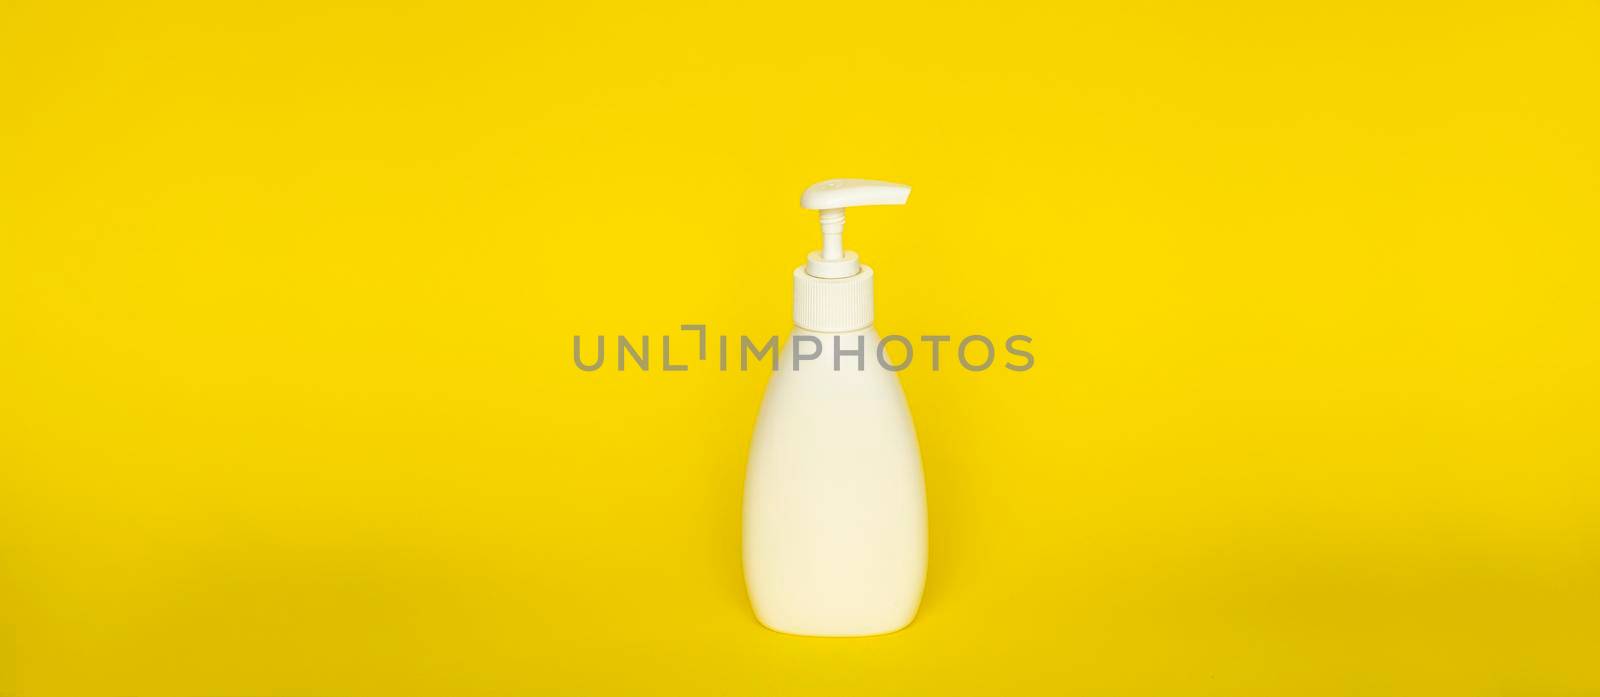 Large white plastic bottle with pump dispenser on yellow background. Mock up template for design. by vovsht